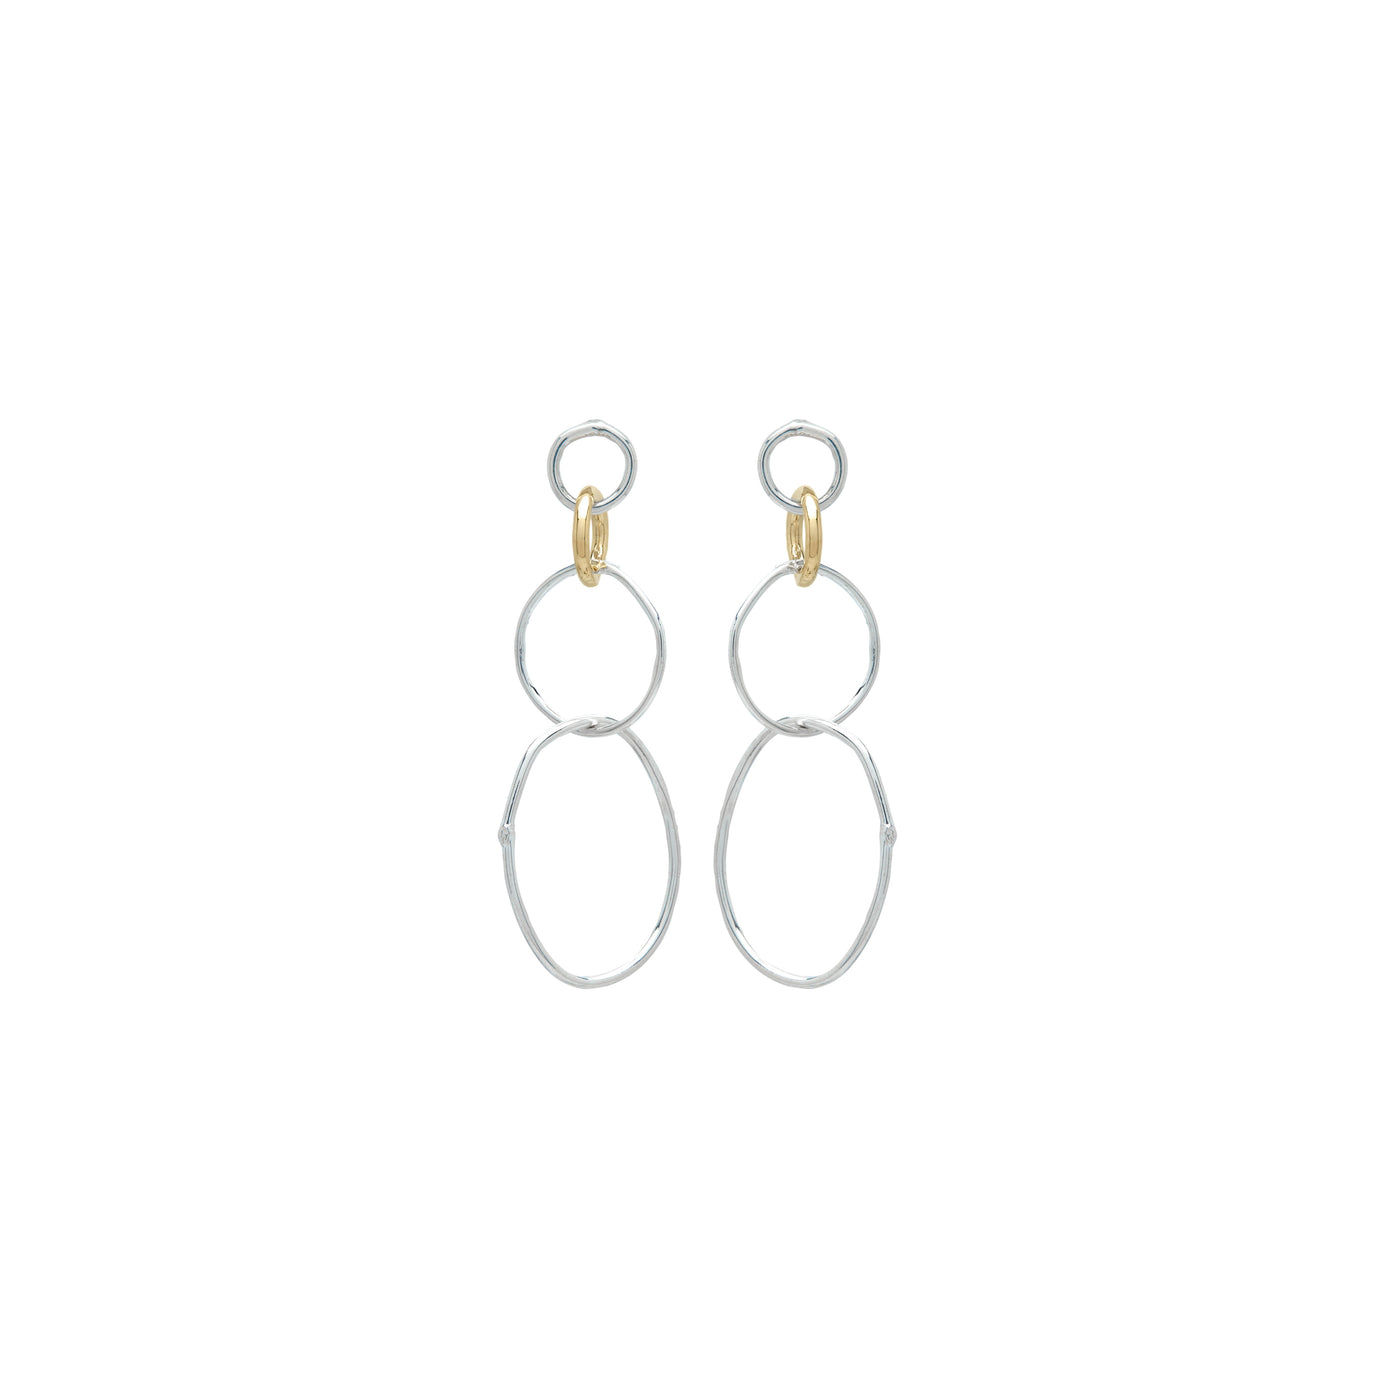 14K Yellow Gold and Sterling Silver Mismatched Quadruple Loop Earrings